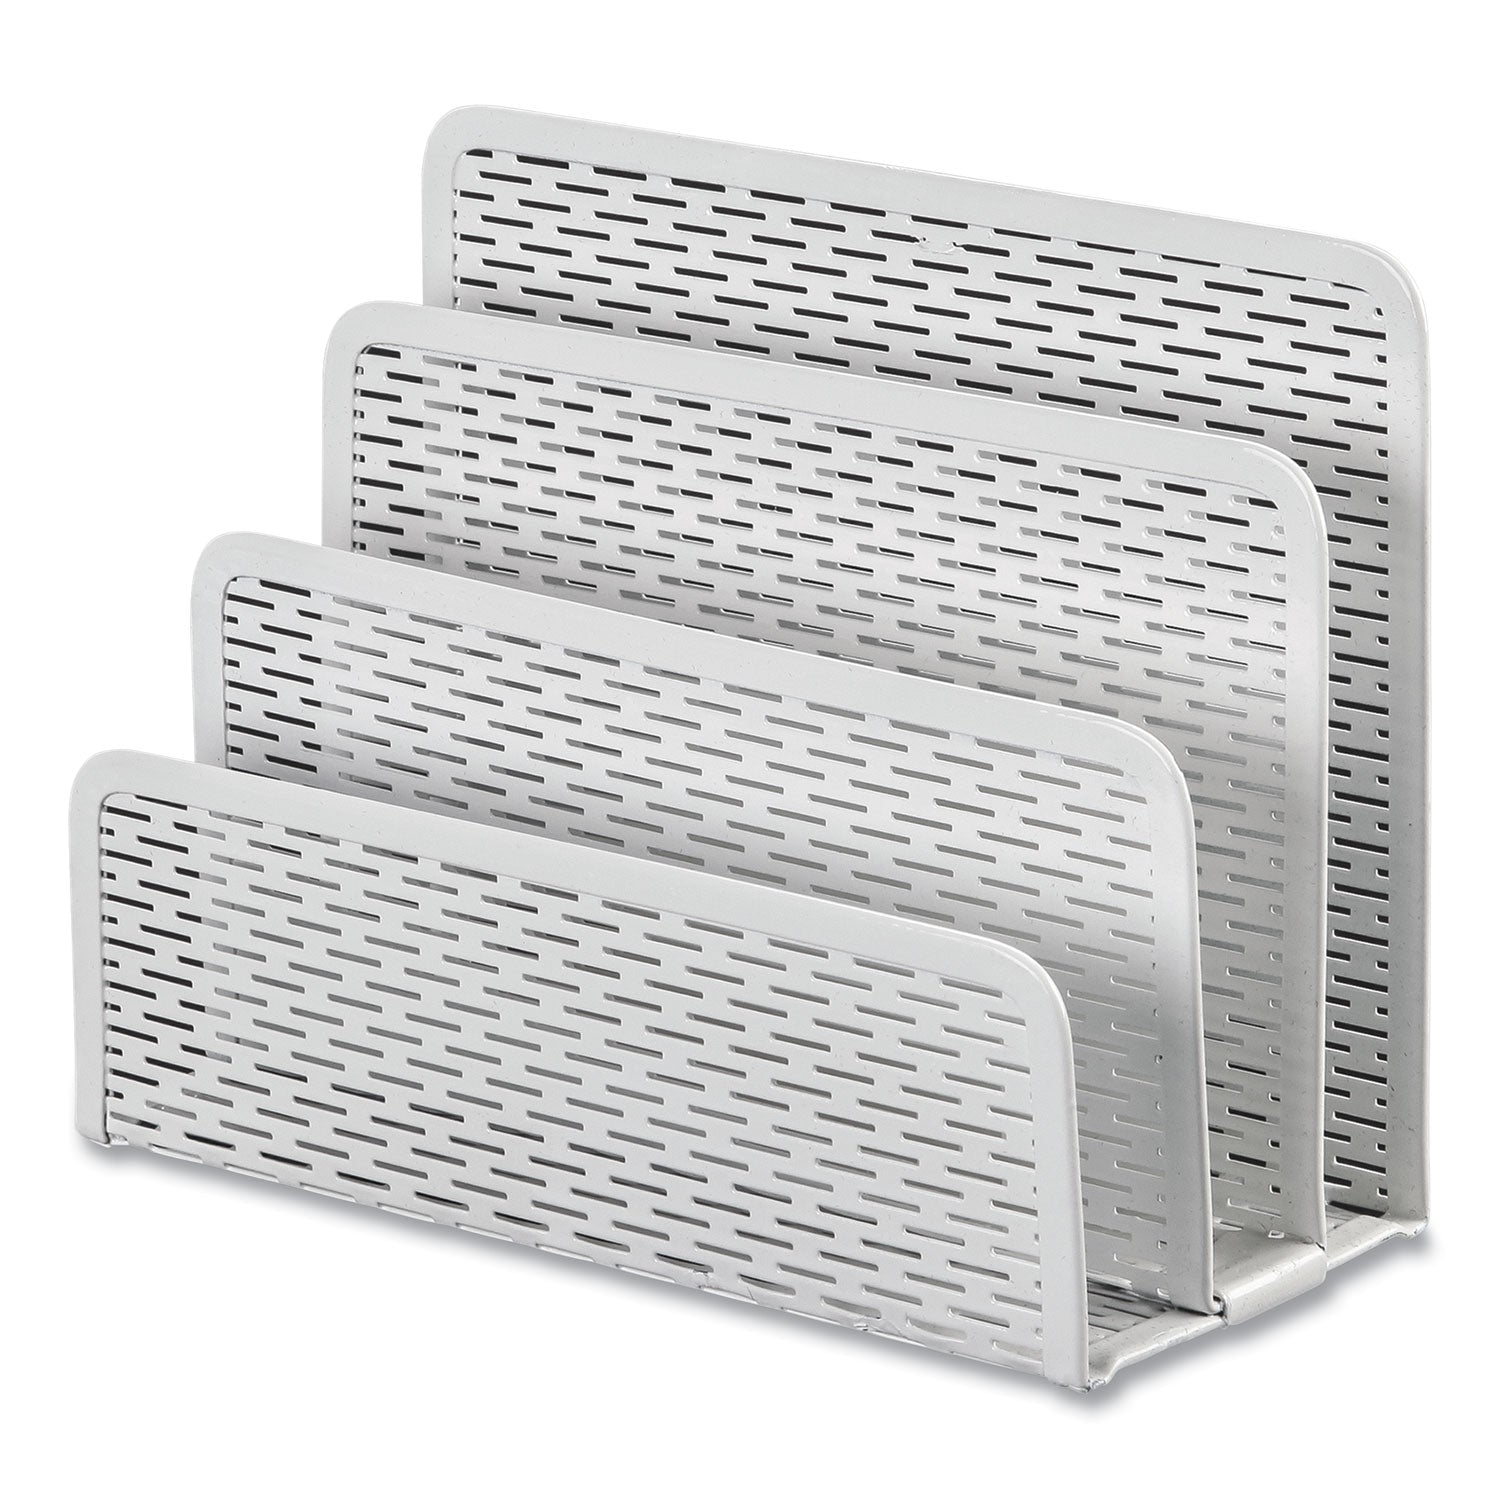 urban-collection-punched-metal-letter-sorter-3-sections-dl-to-a6-size-files-65-x-325-x-55-white_aopart20003wh - 2